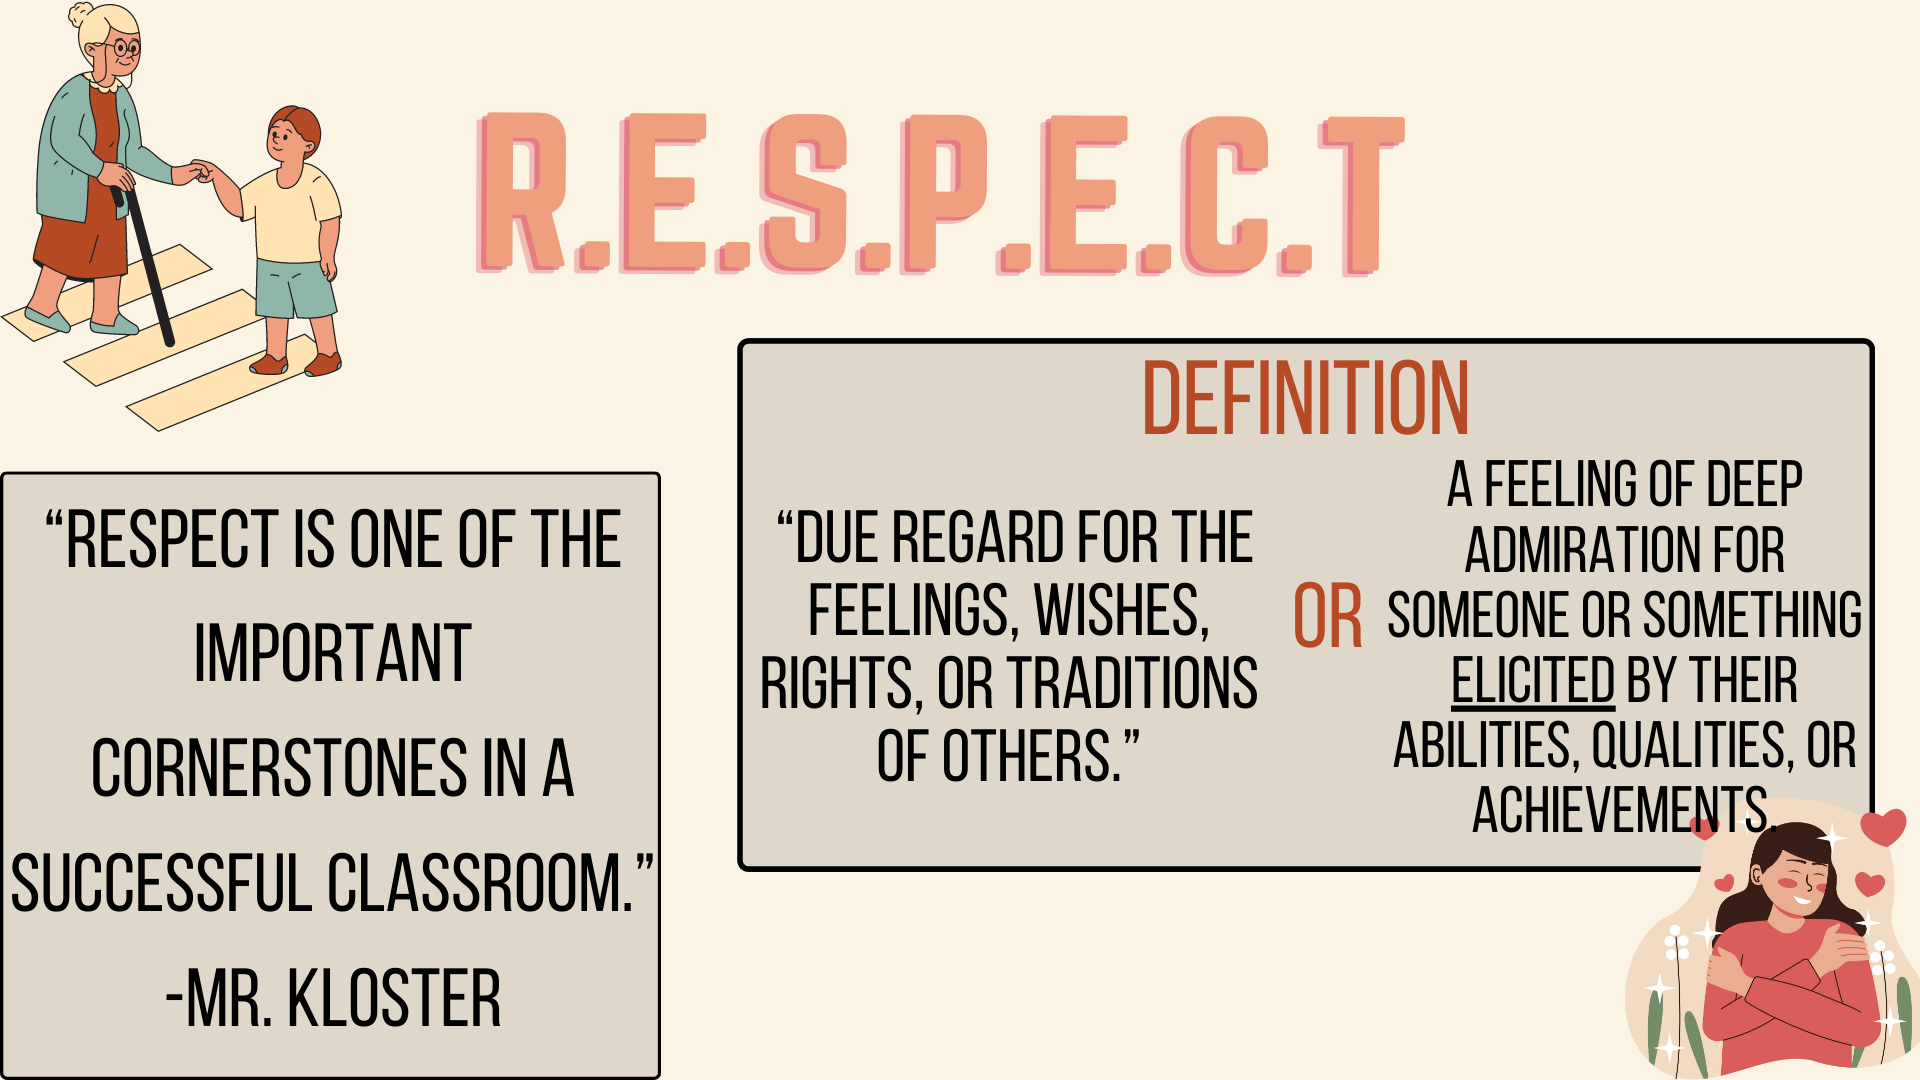 What is respect and what is its role in school?